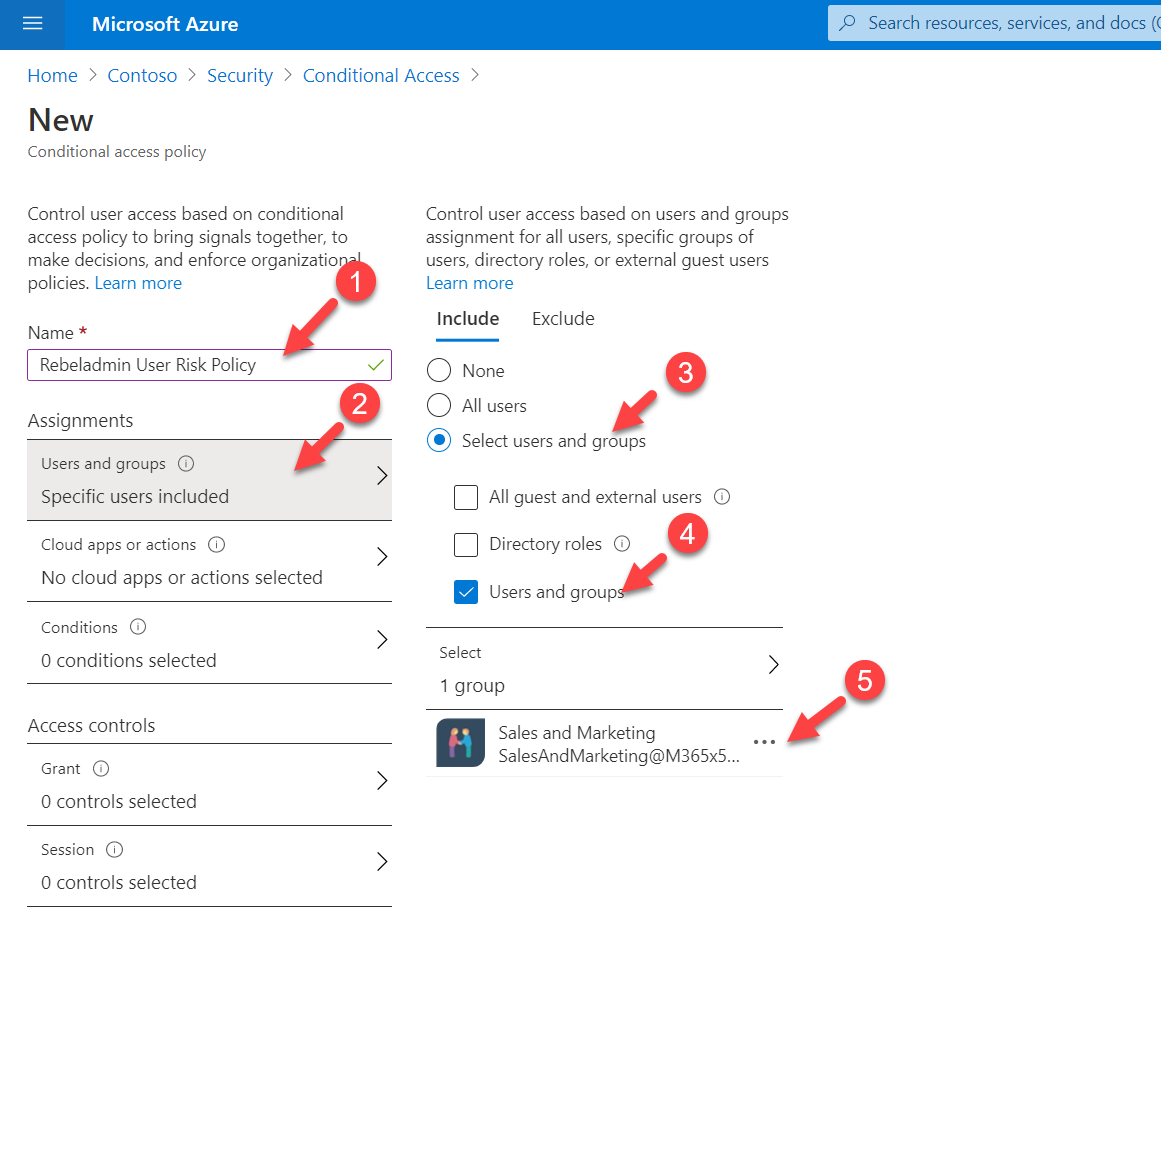 Conditional access policy users & groups selection